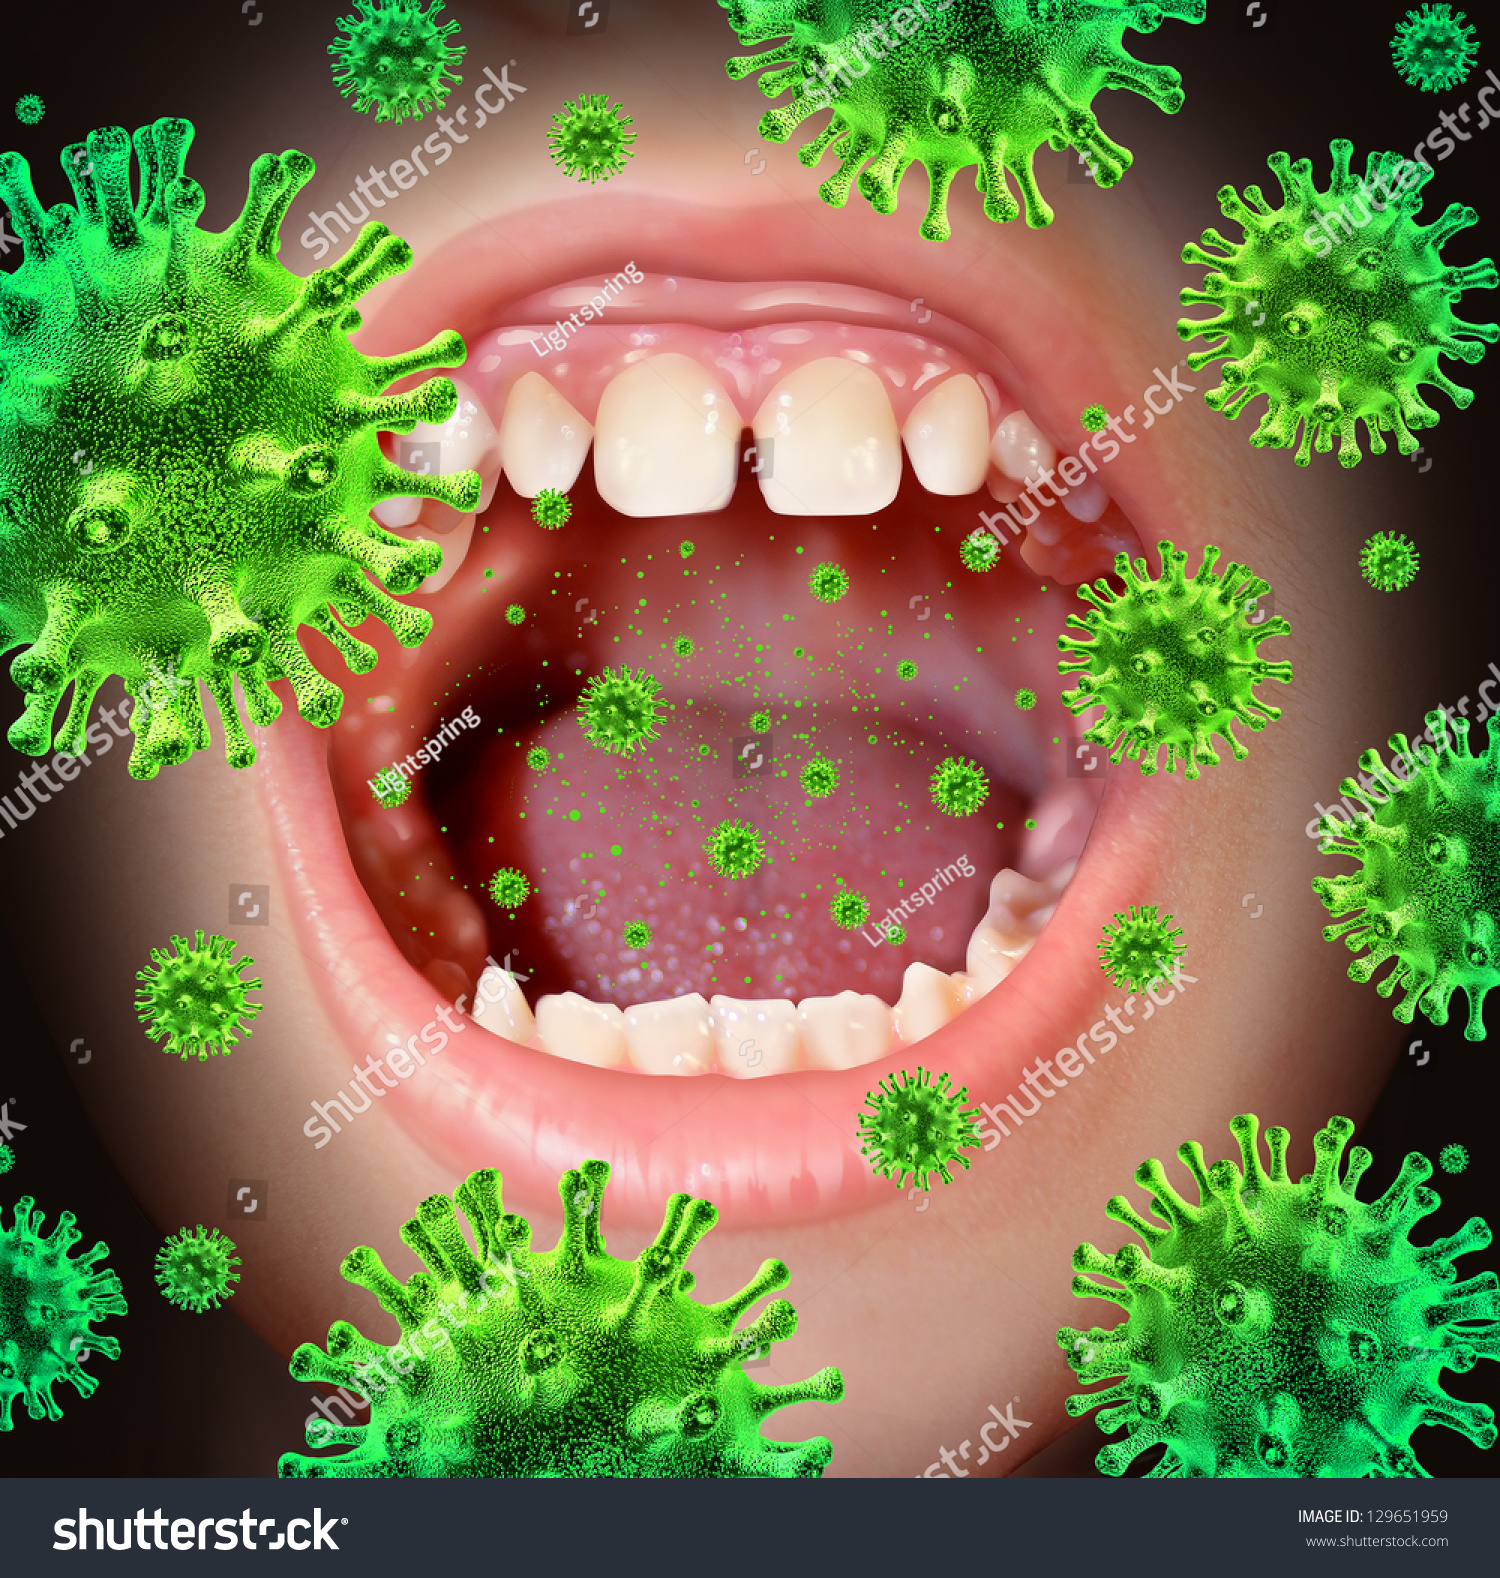 Dissertation infections from spitting